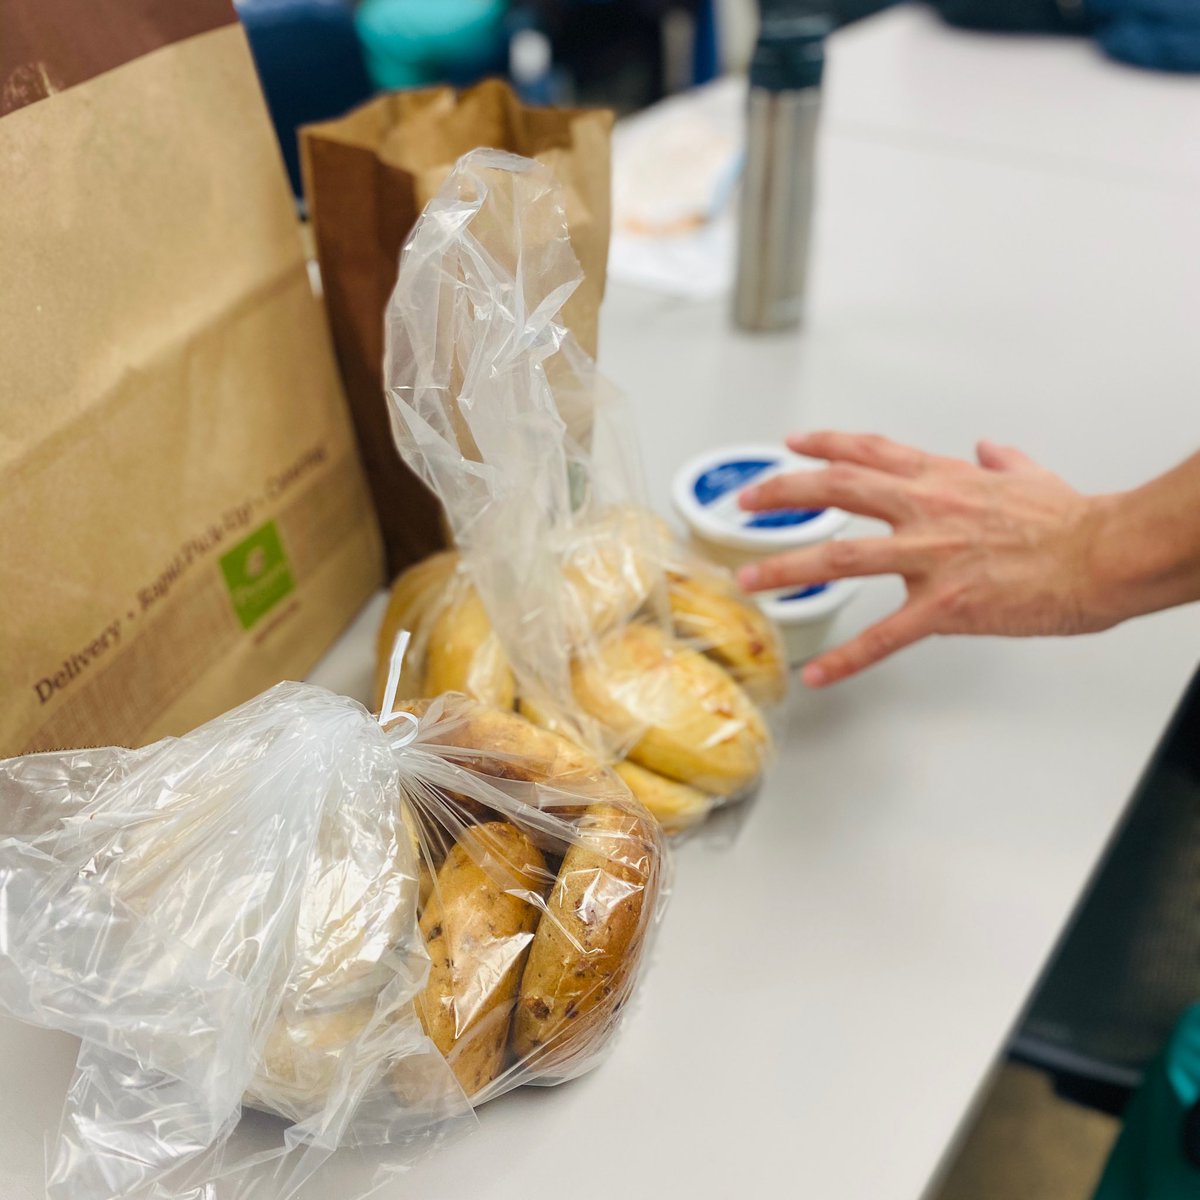 Staff Surgeon Dr. Rupp on Colorectal Surgery making sure her weekend rounding team is well fed. #Yummy @UIowa_Surgery #ChangingMedicineChangingLives #surgsnacks